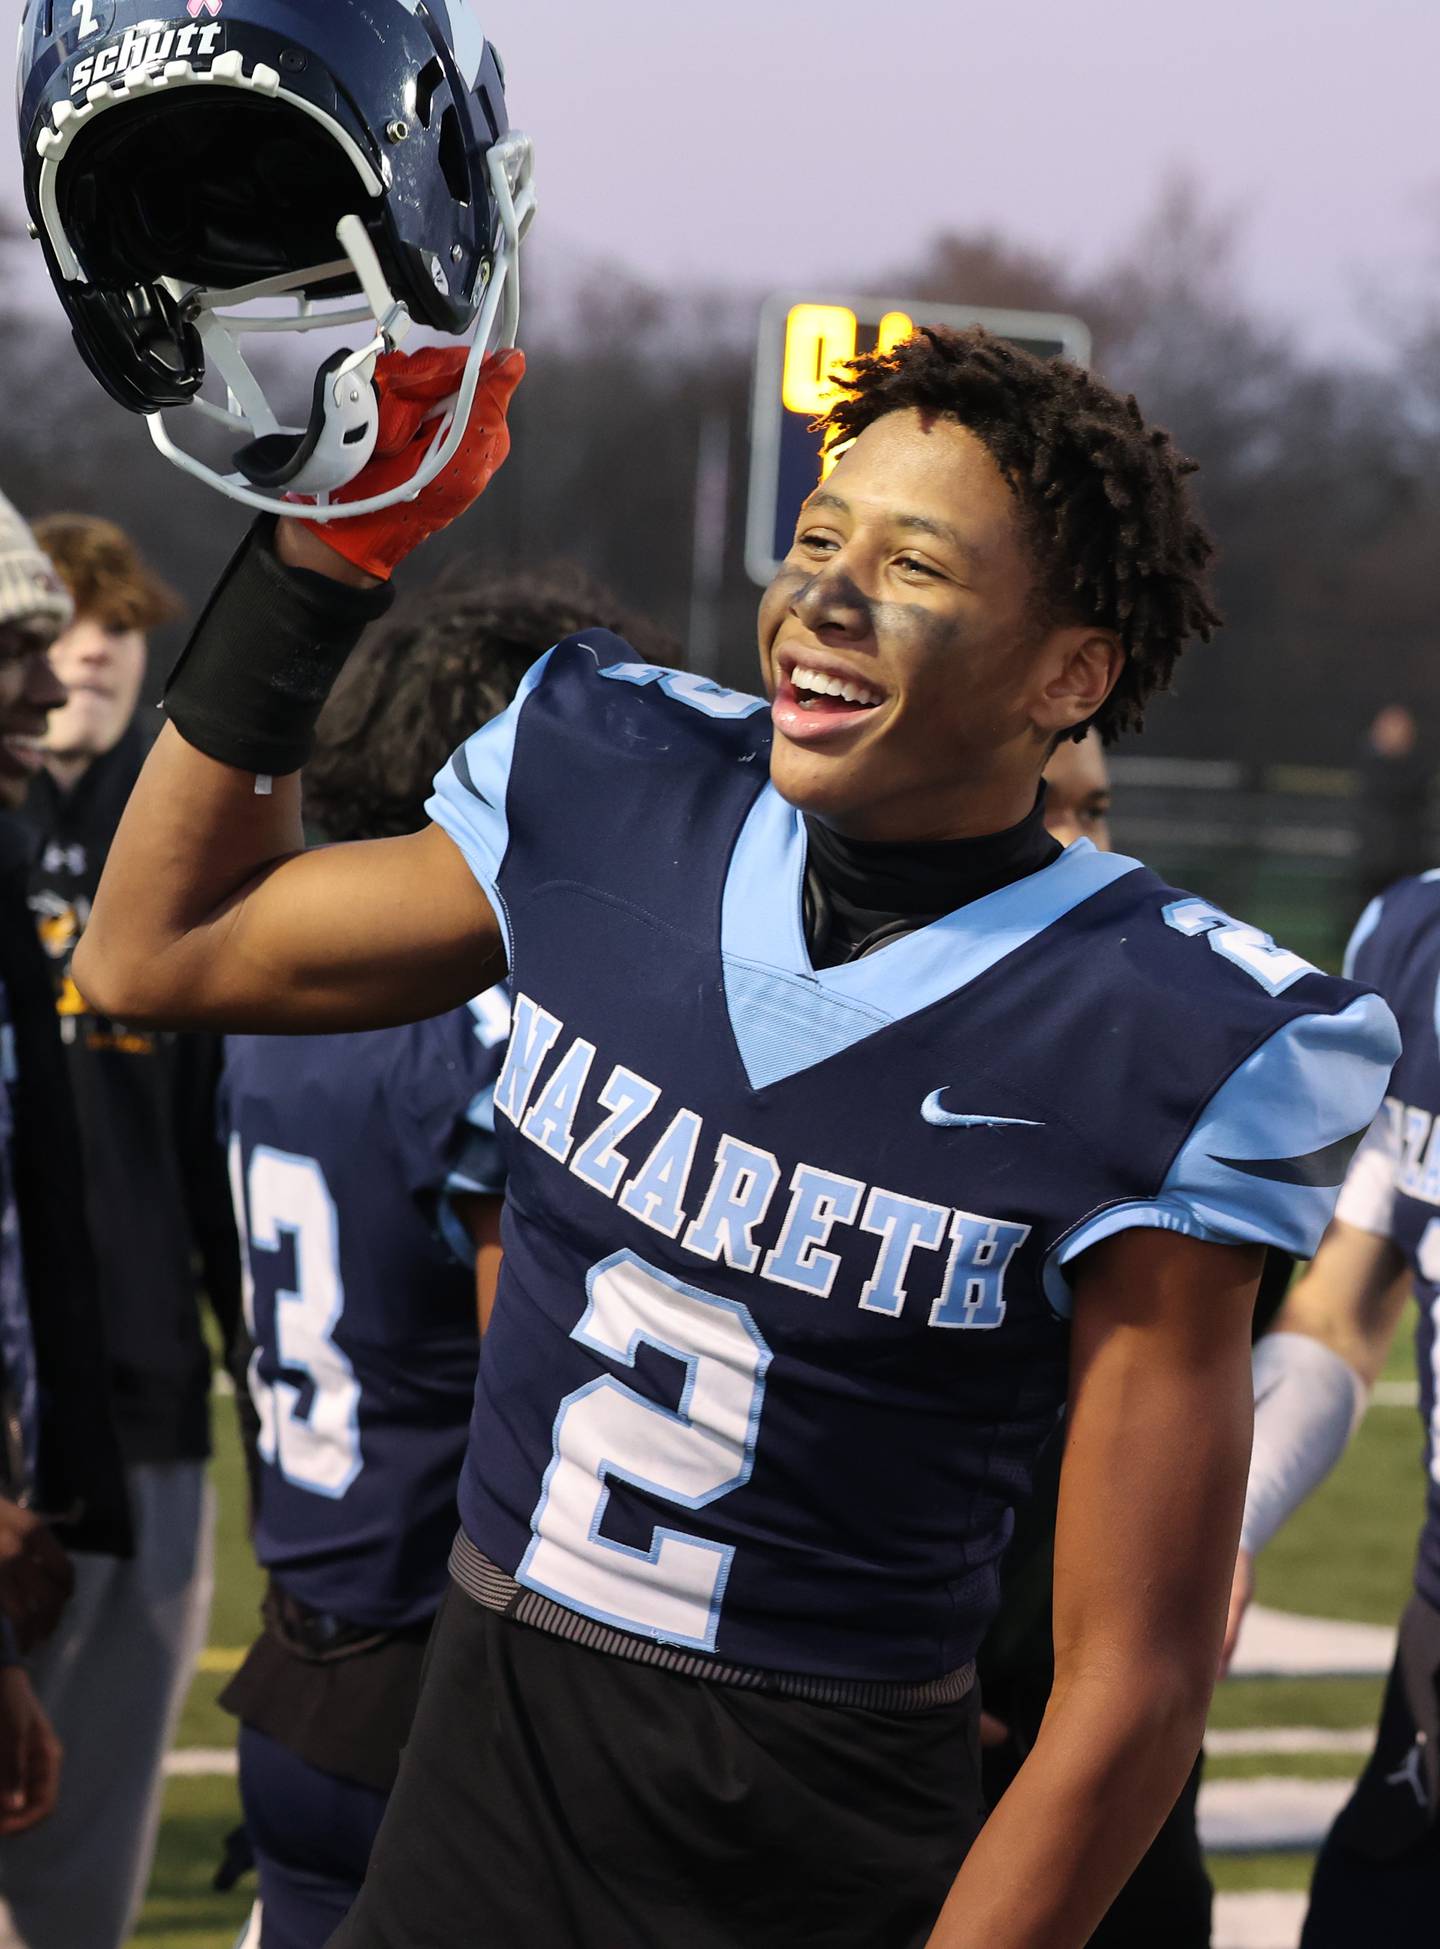 Nazareth's Garrett Reese (2) celebrates after winning against St. Francis at the boys varsity IHSA 5A semifinal between Nazareth Academy and St. Francis high school in La Grange Park, IL on Saturday, Nov. 18, 2023.